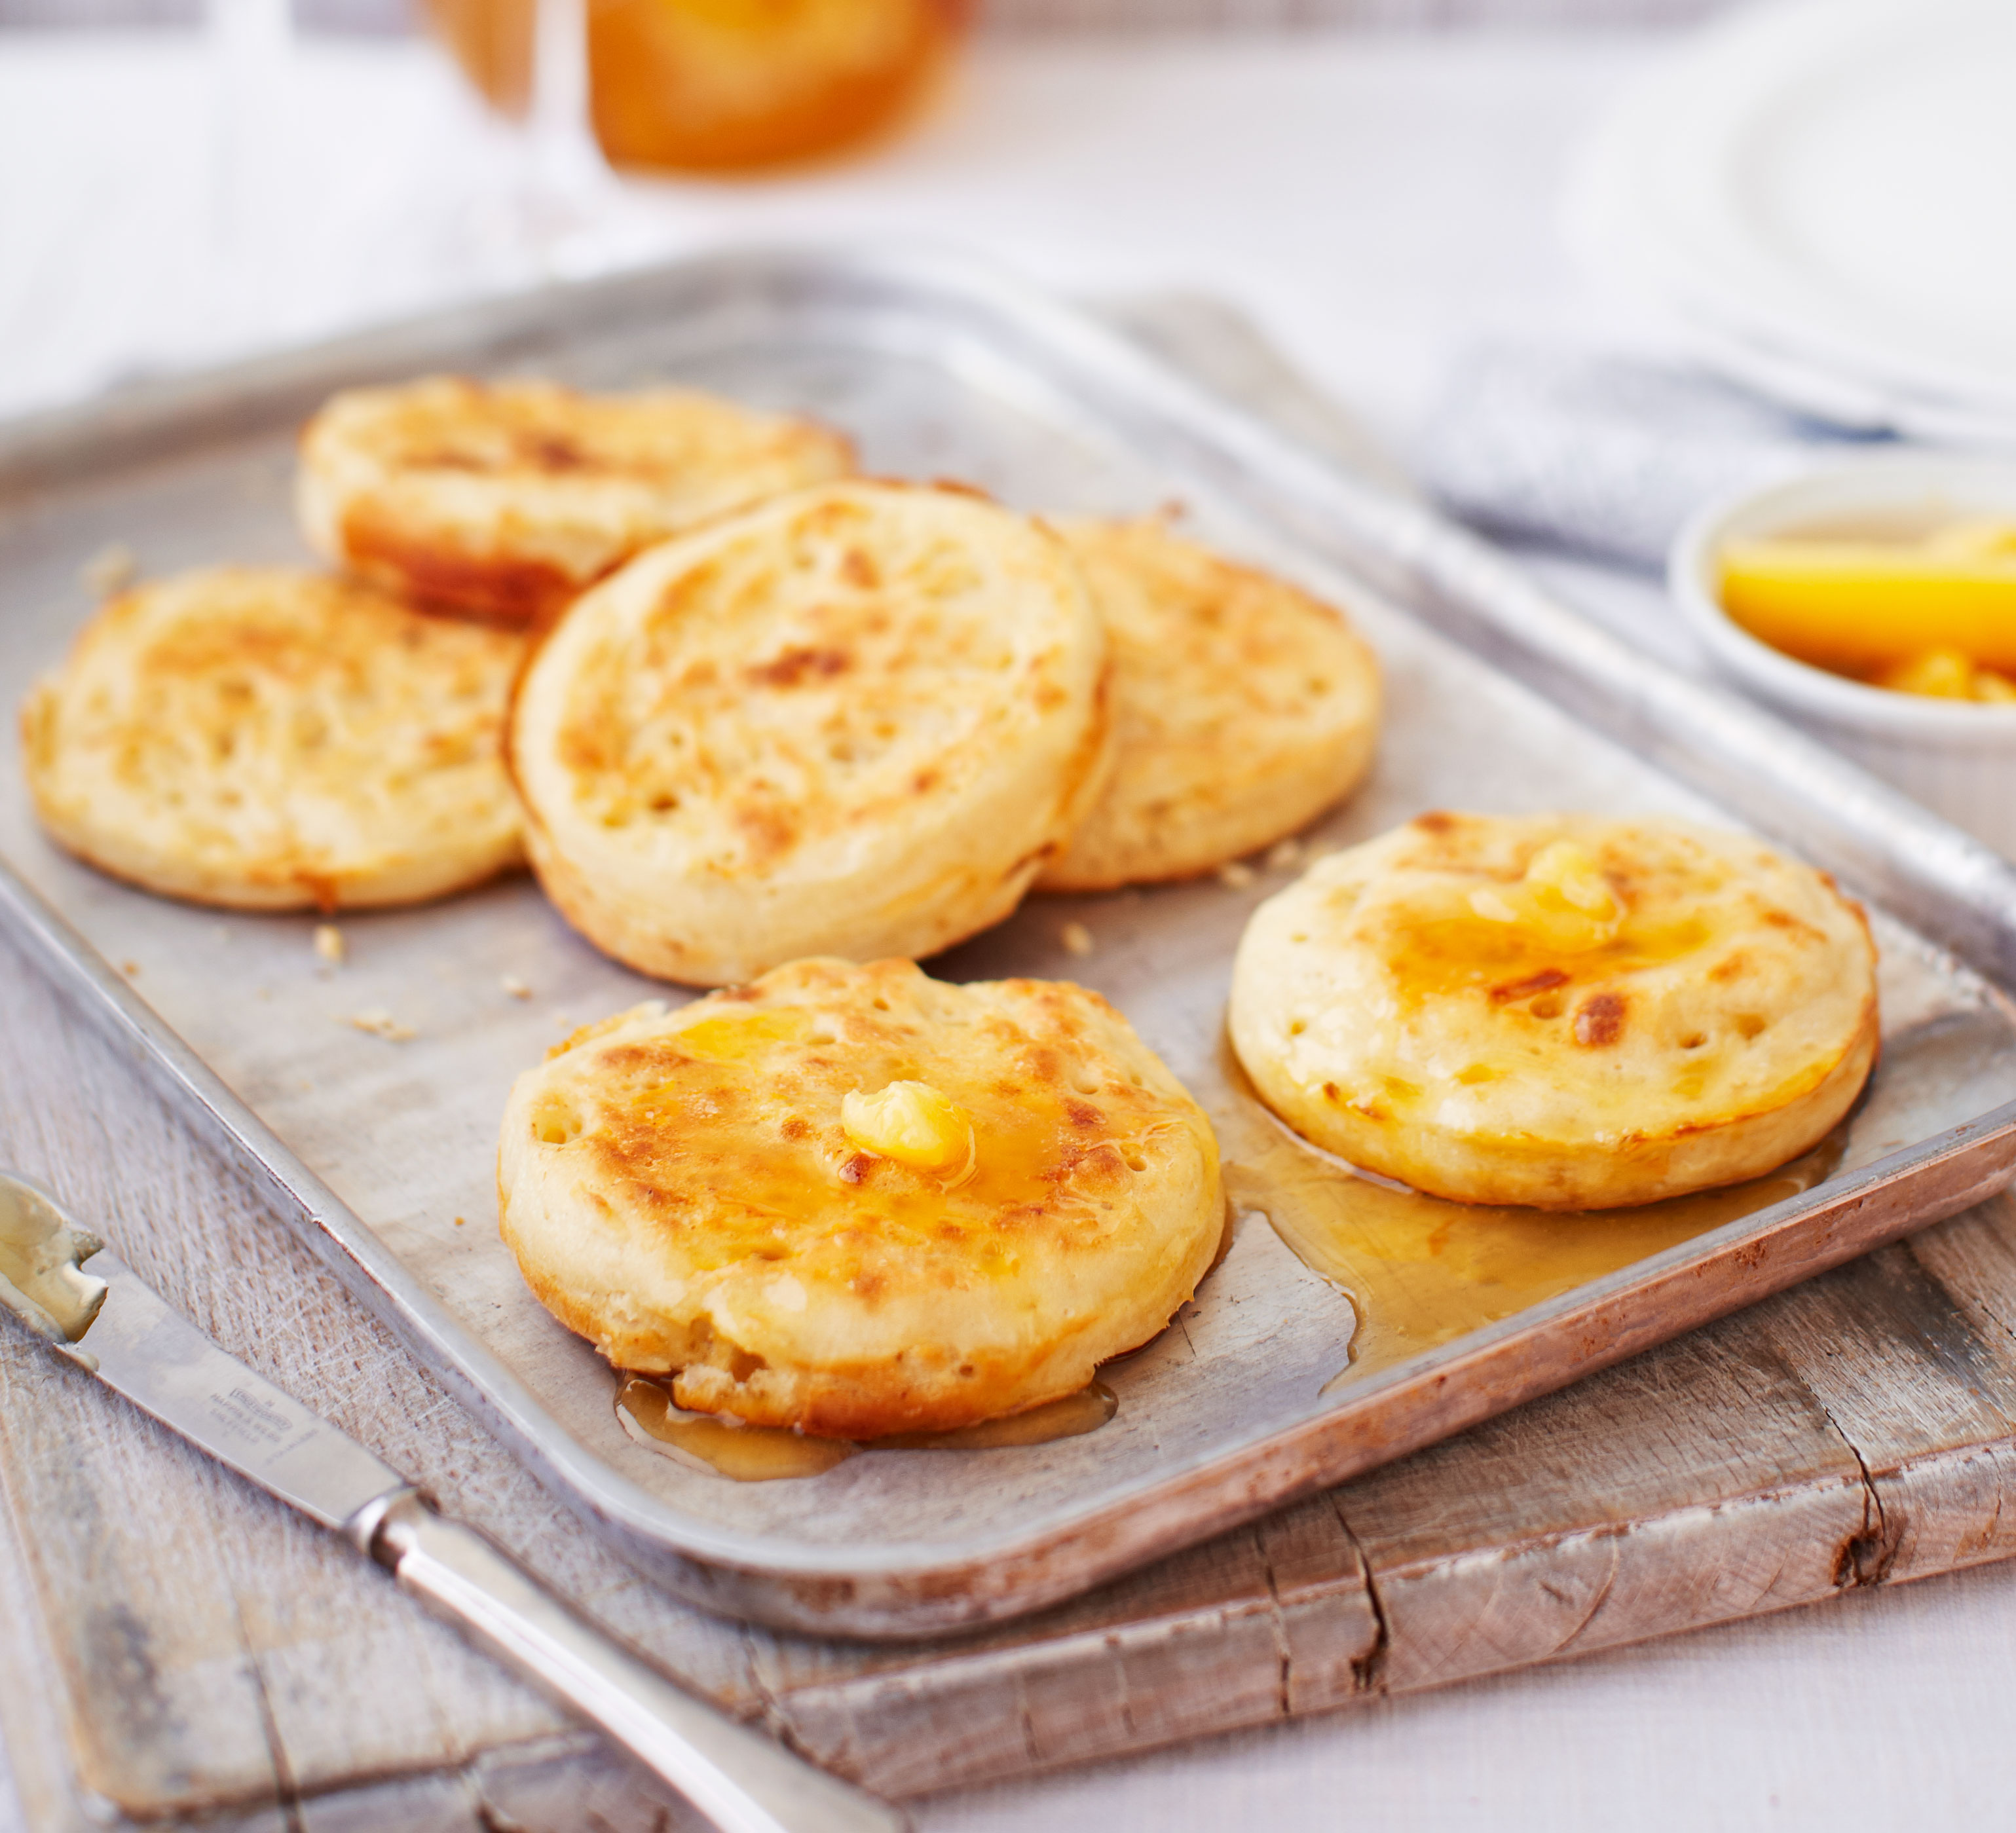 Homemade crumpets with burnt honey butter